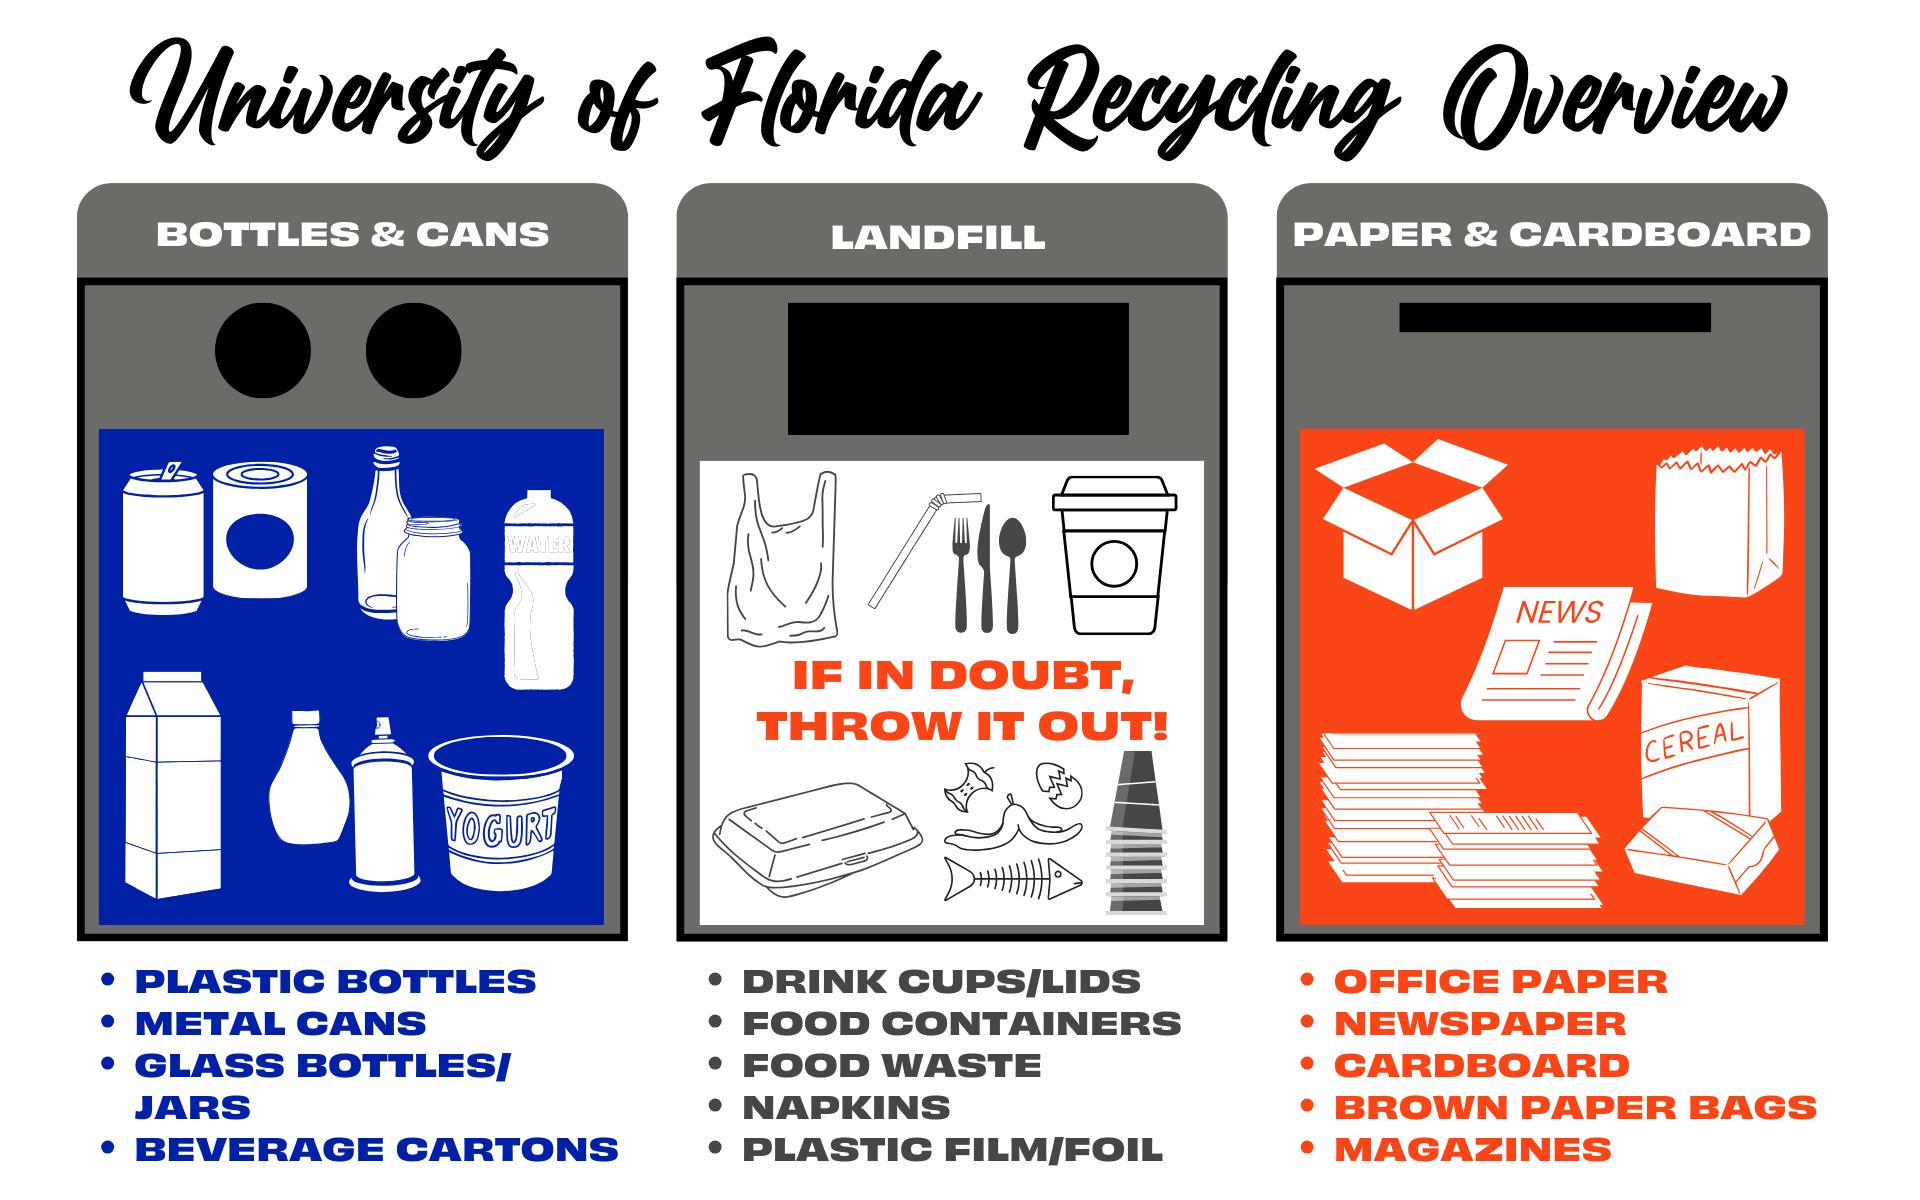 Graphic overview of the three different waste bins for recycling and landfill at UF and in Gainesville. 